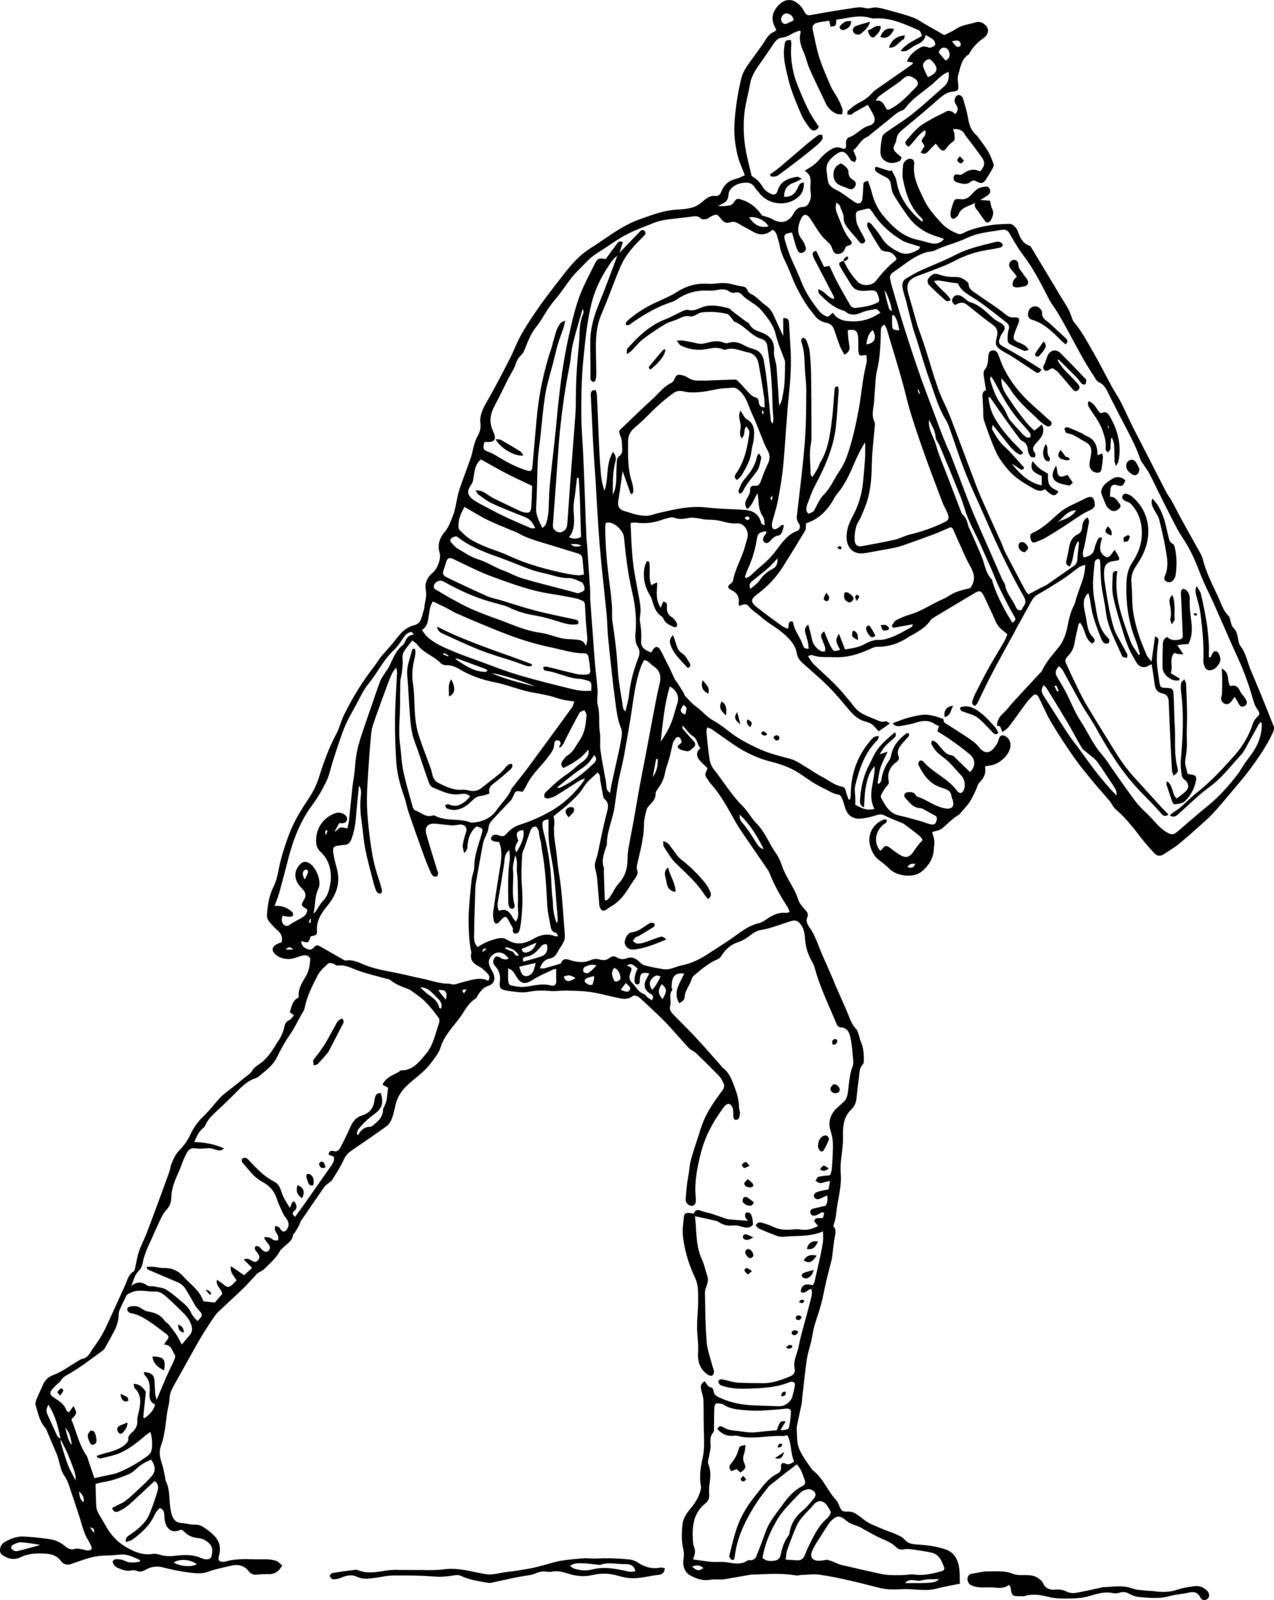 This is the image of the soldier. There are some weapons in the soldier's hand. This is the Roman soldier on foot during the conquest of Italy, vintage line drawing or engraving illustration.